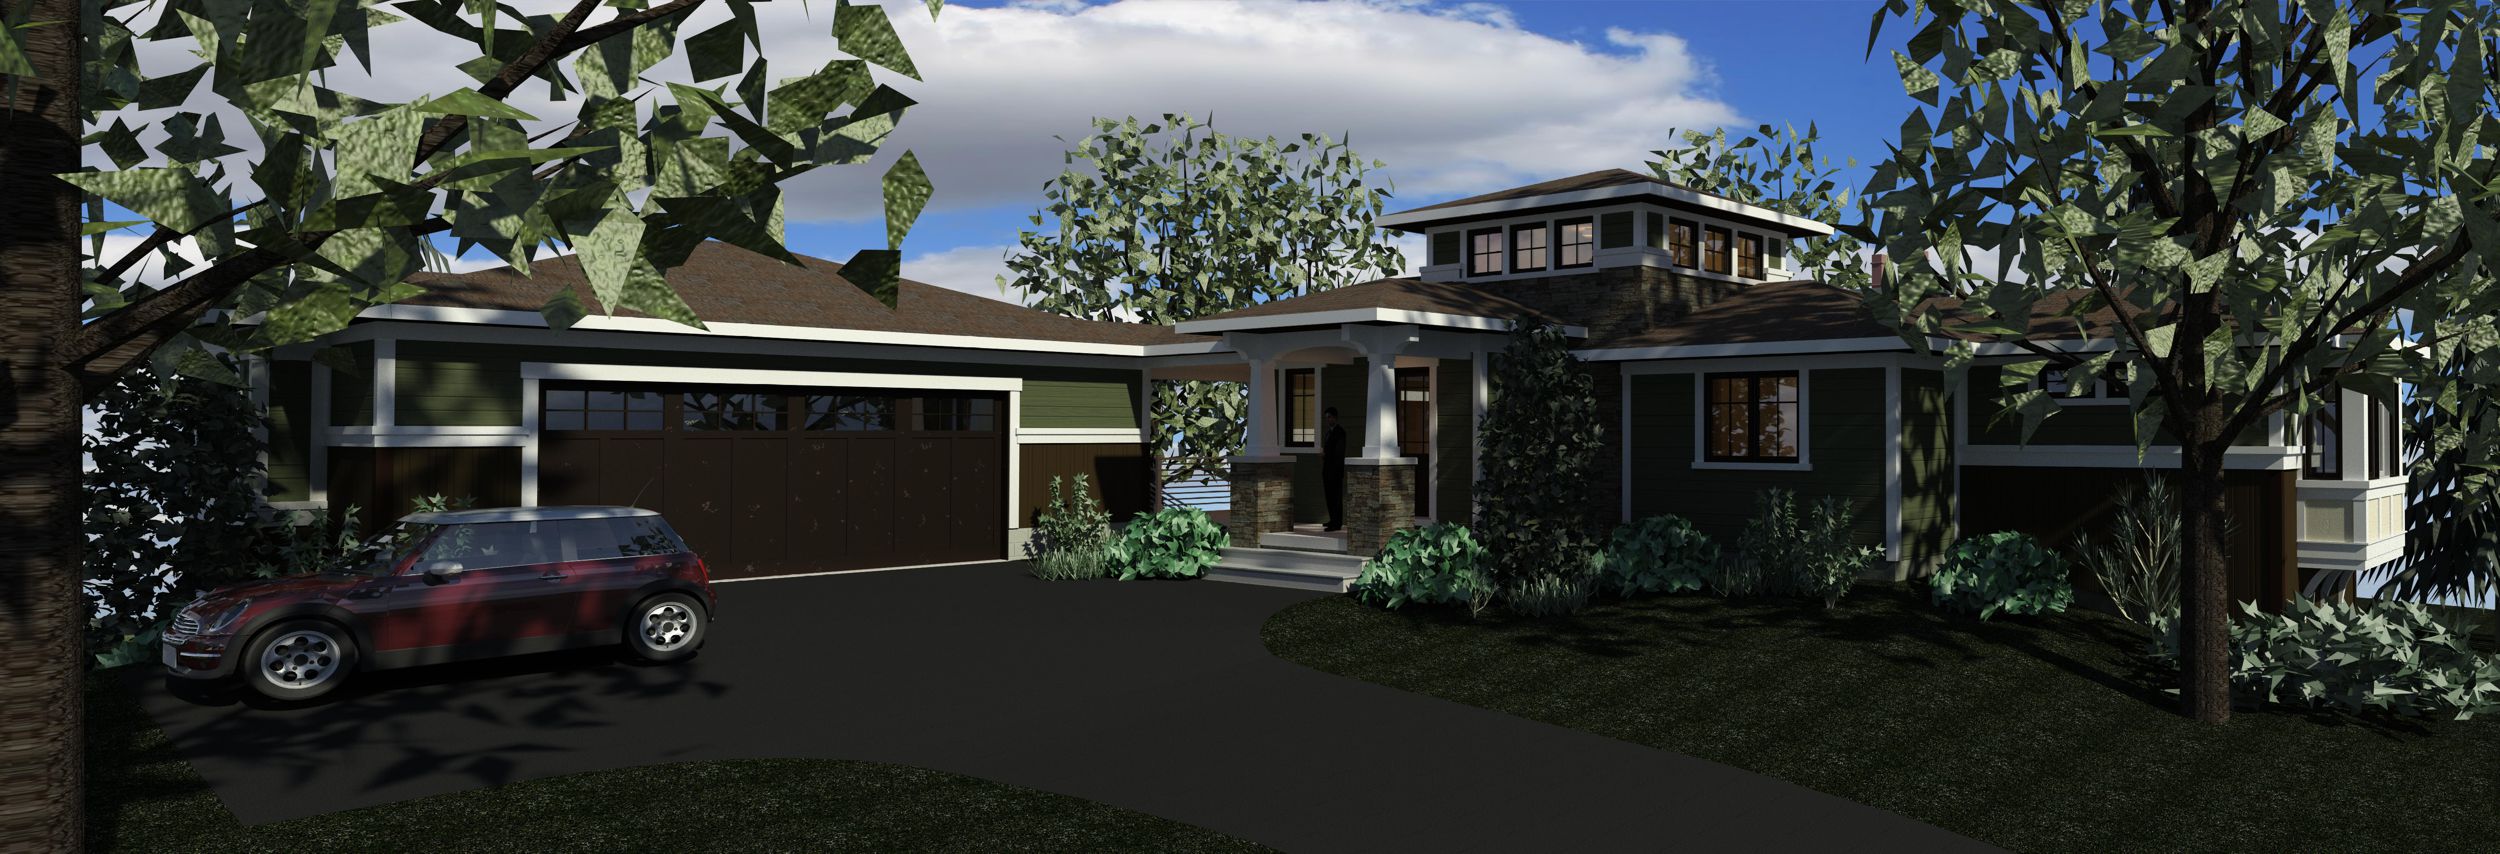 Color computer rendering of prairie style home looking up driveway.